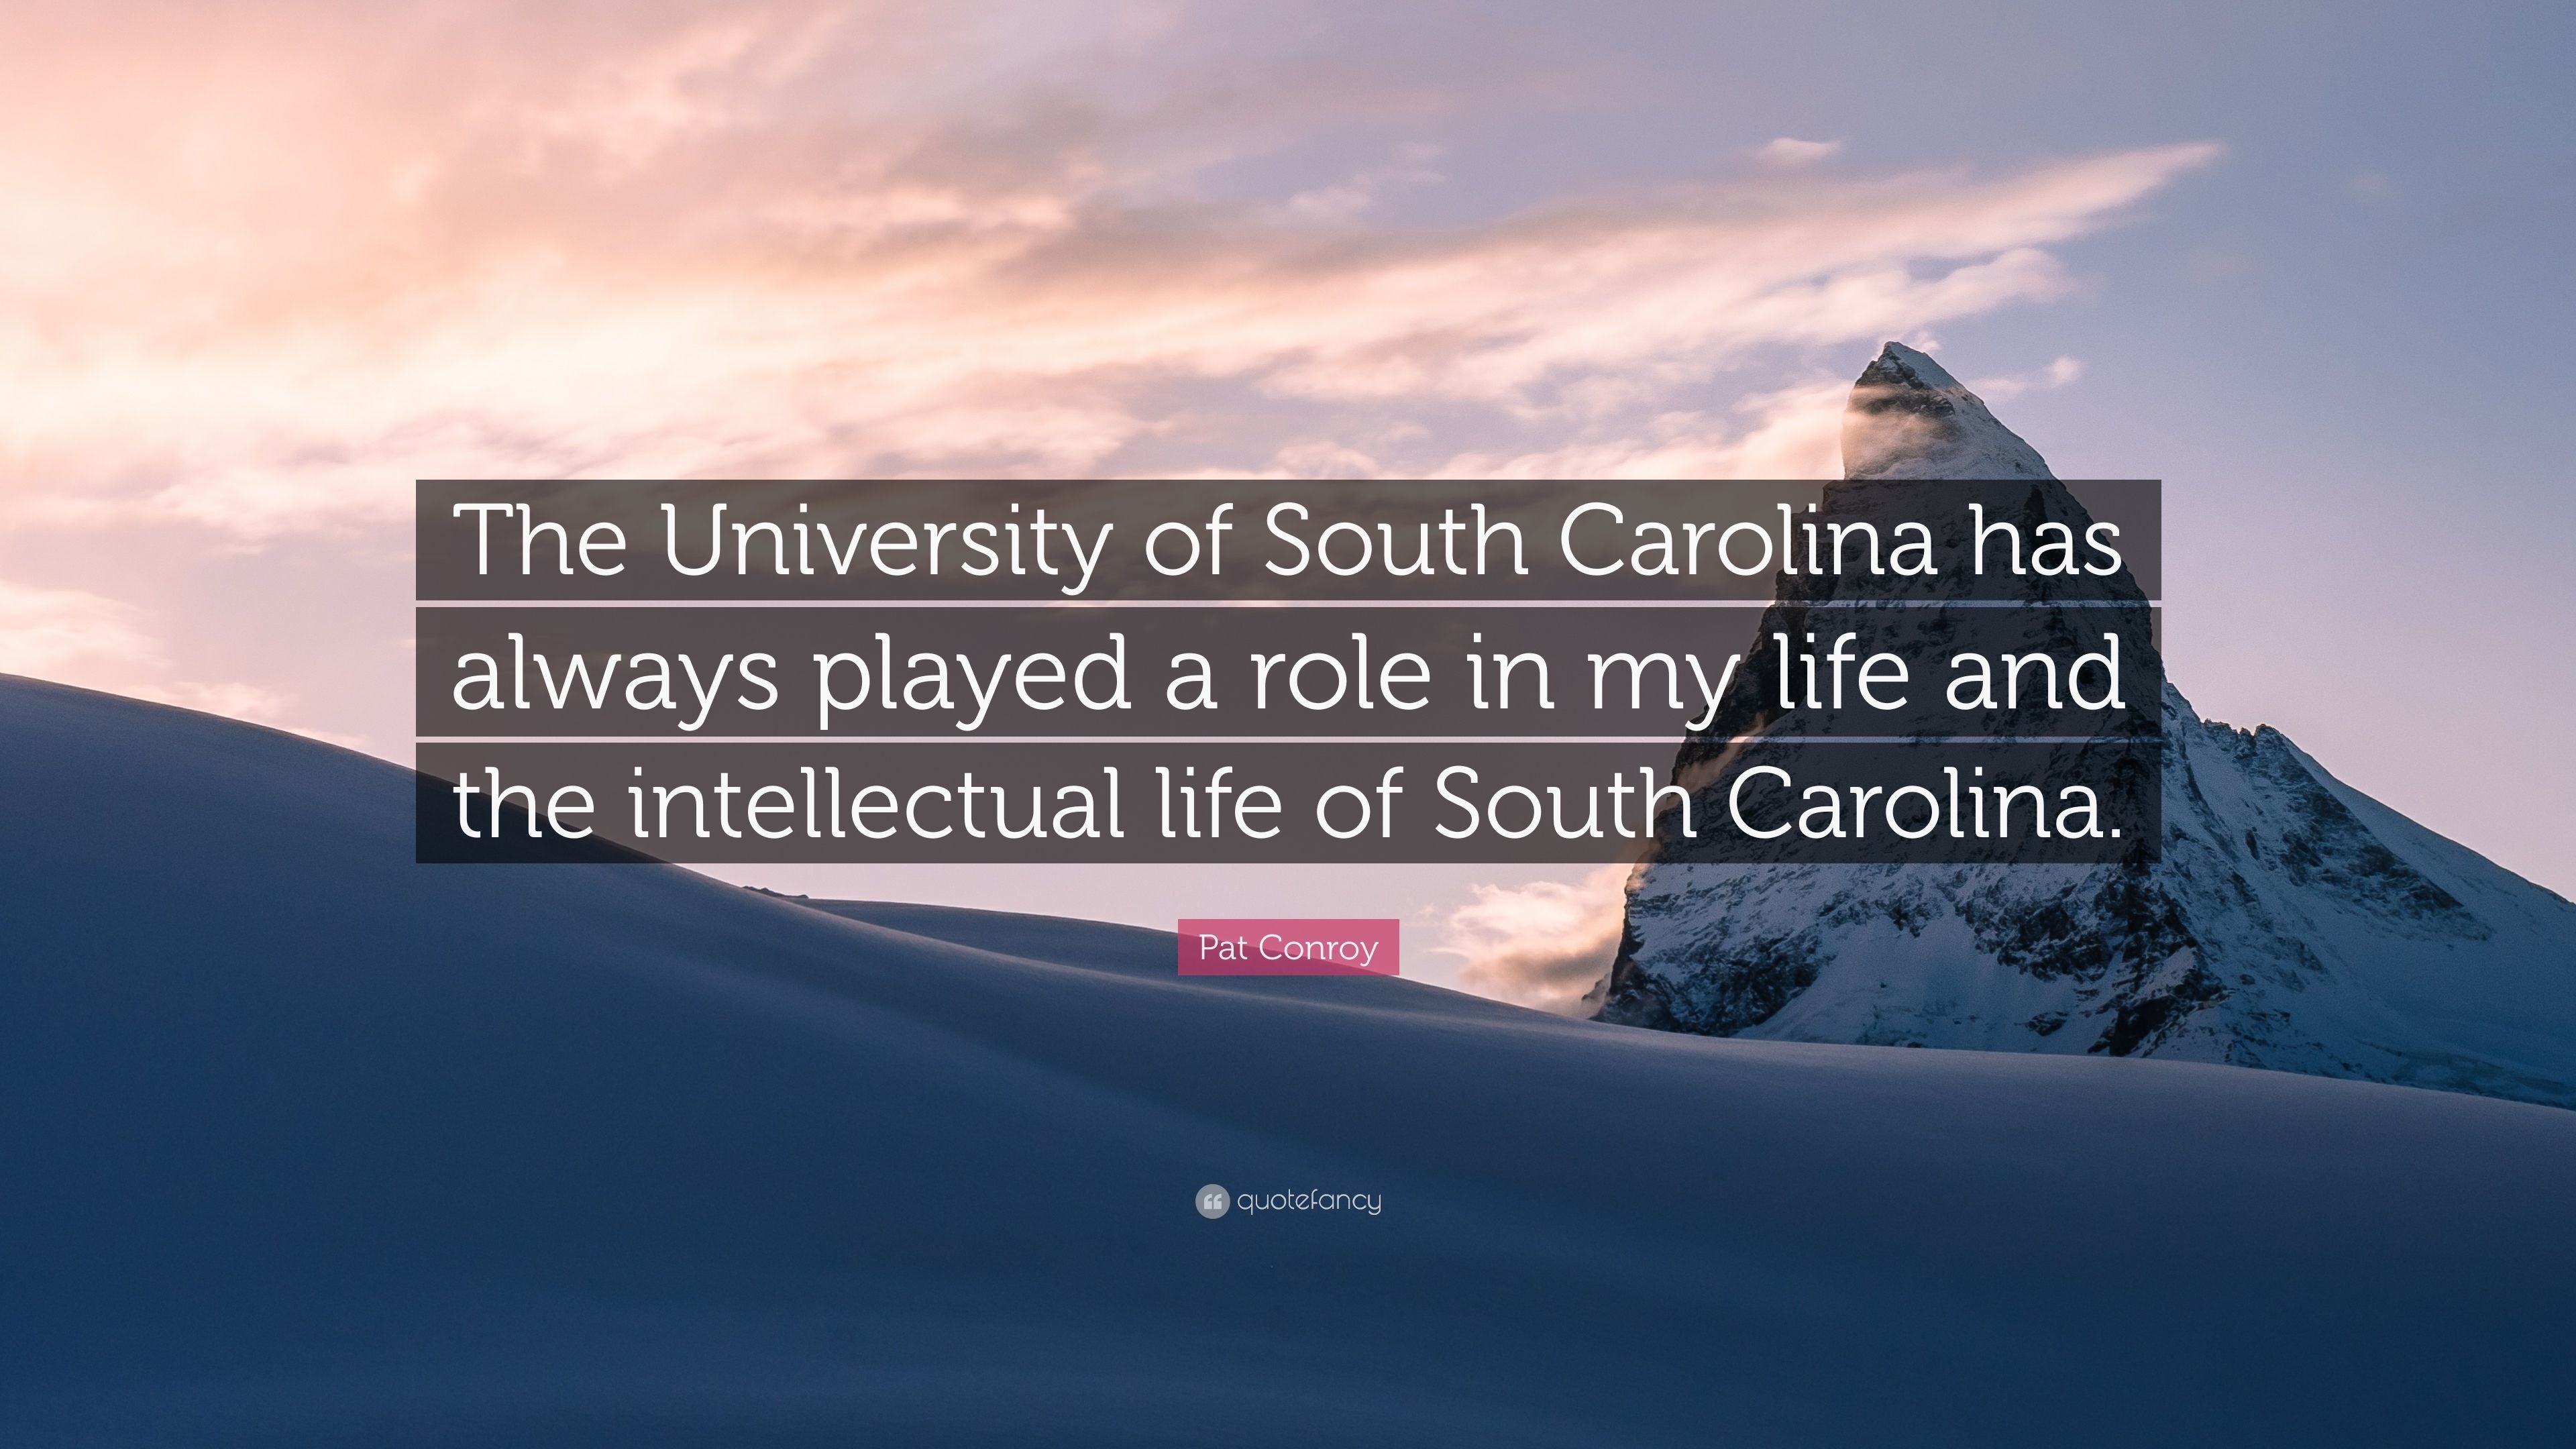 3840x2160 Pat Conroy Quote: “The University of South Carolina has always played a  role in